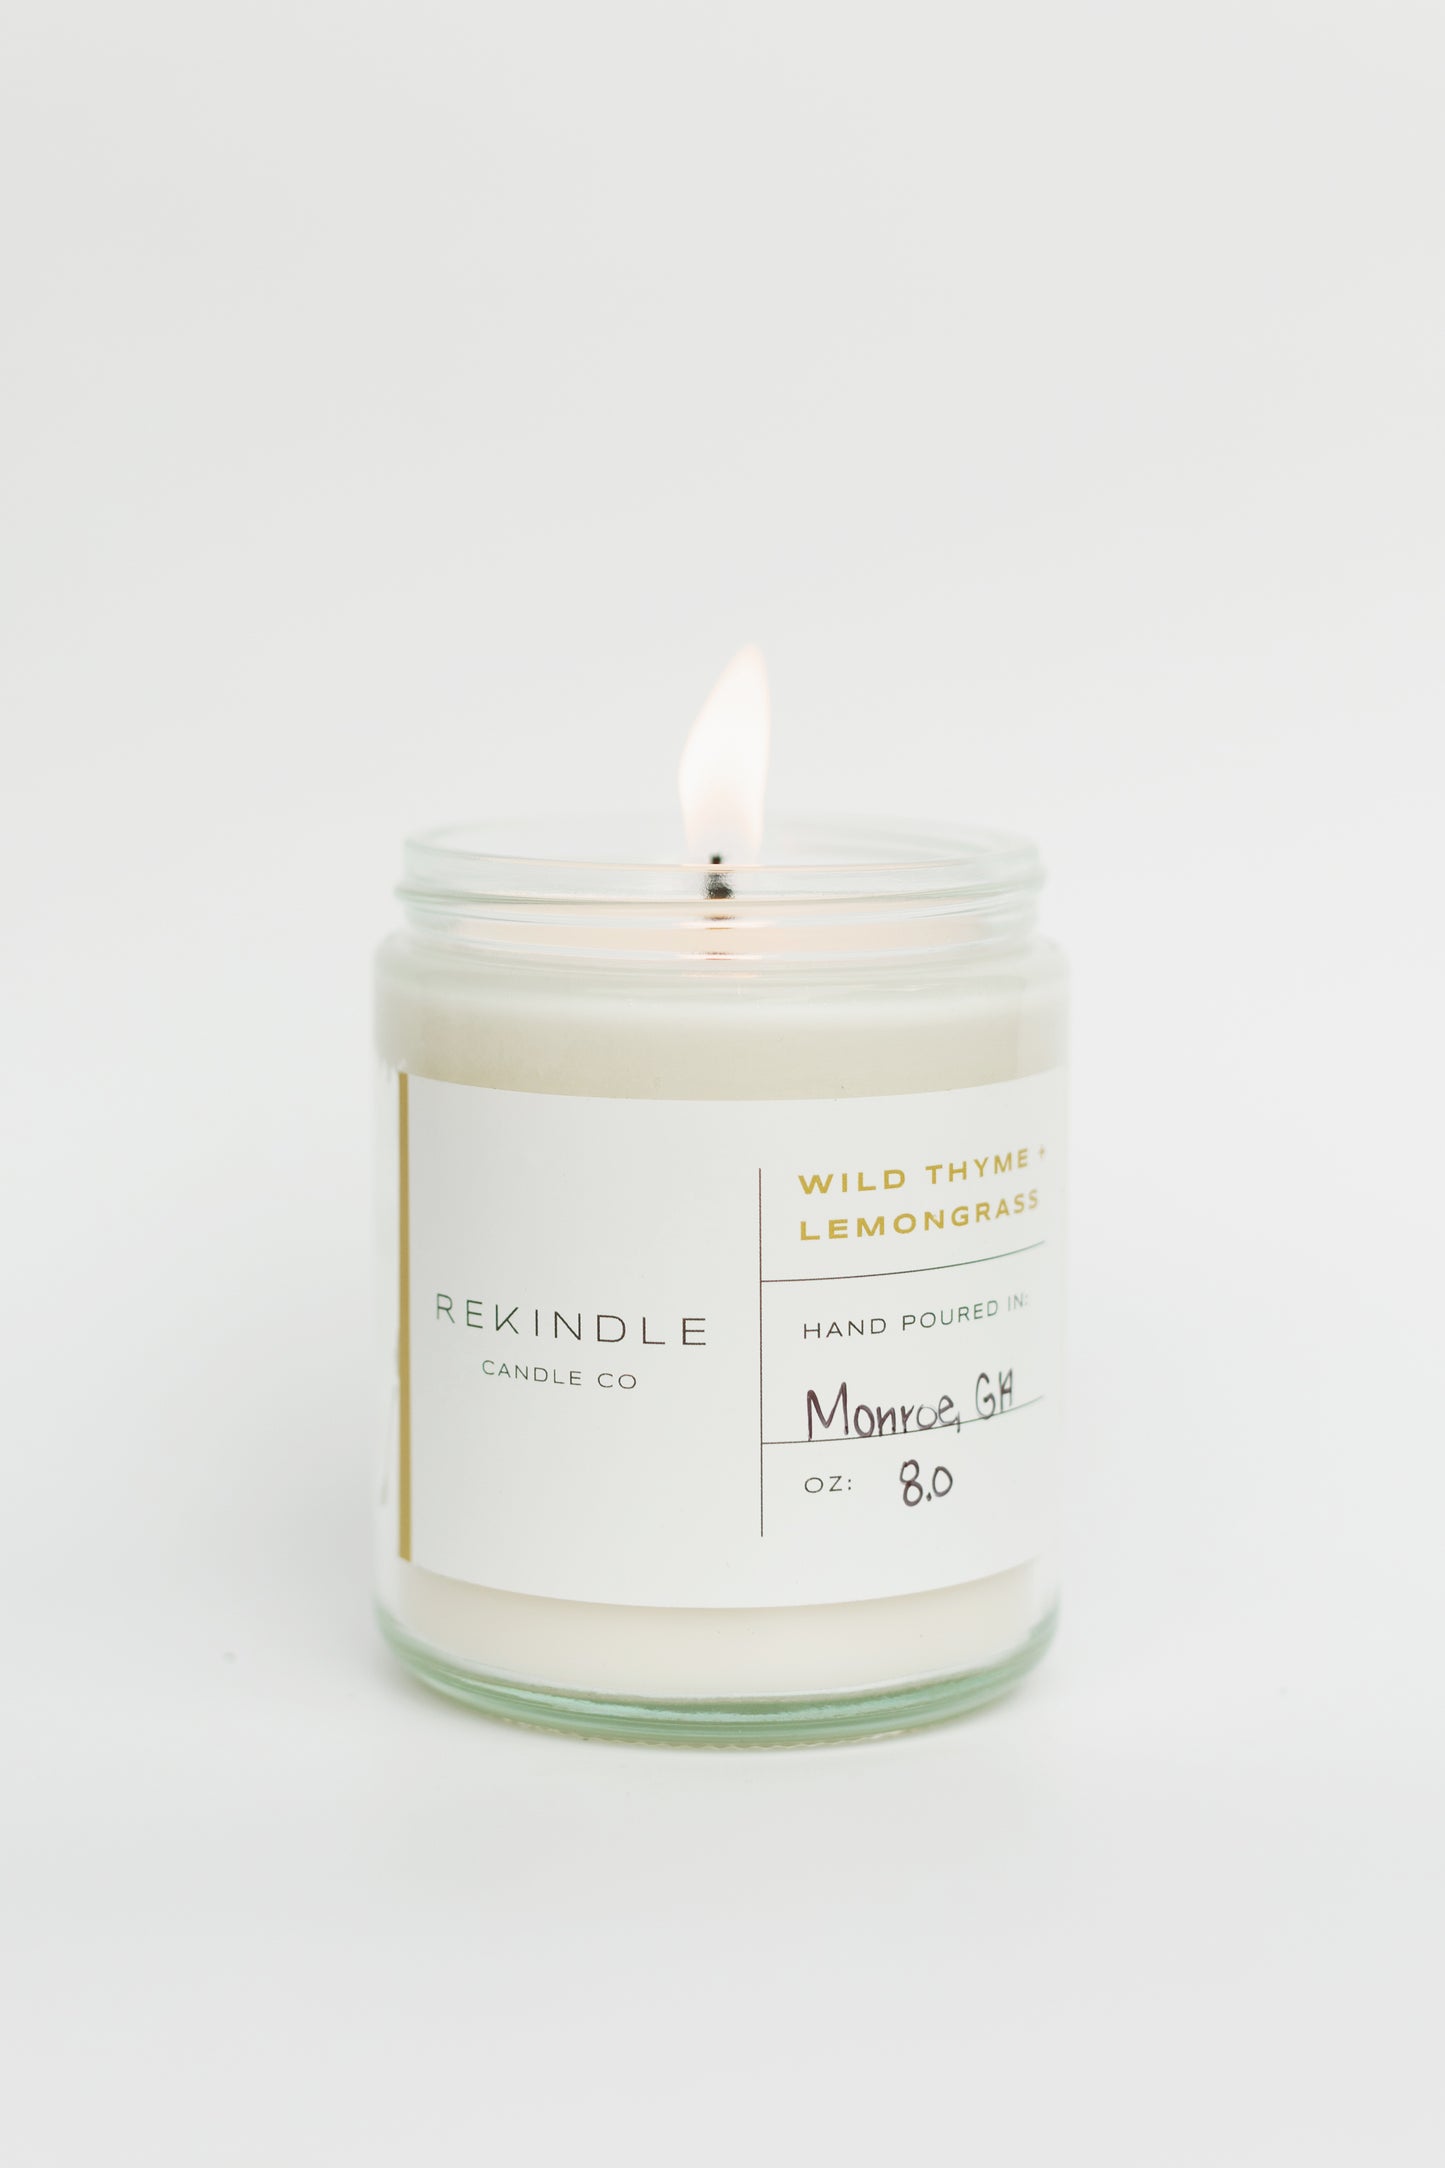 Wild Thyme + Lemongrass Soy Candle